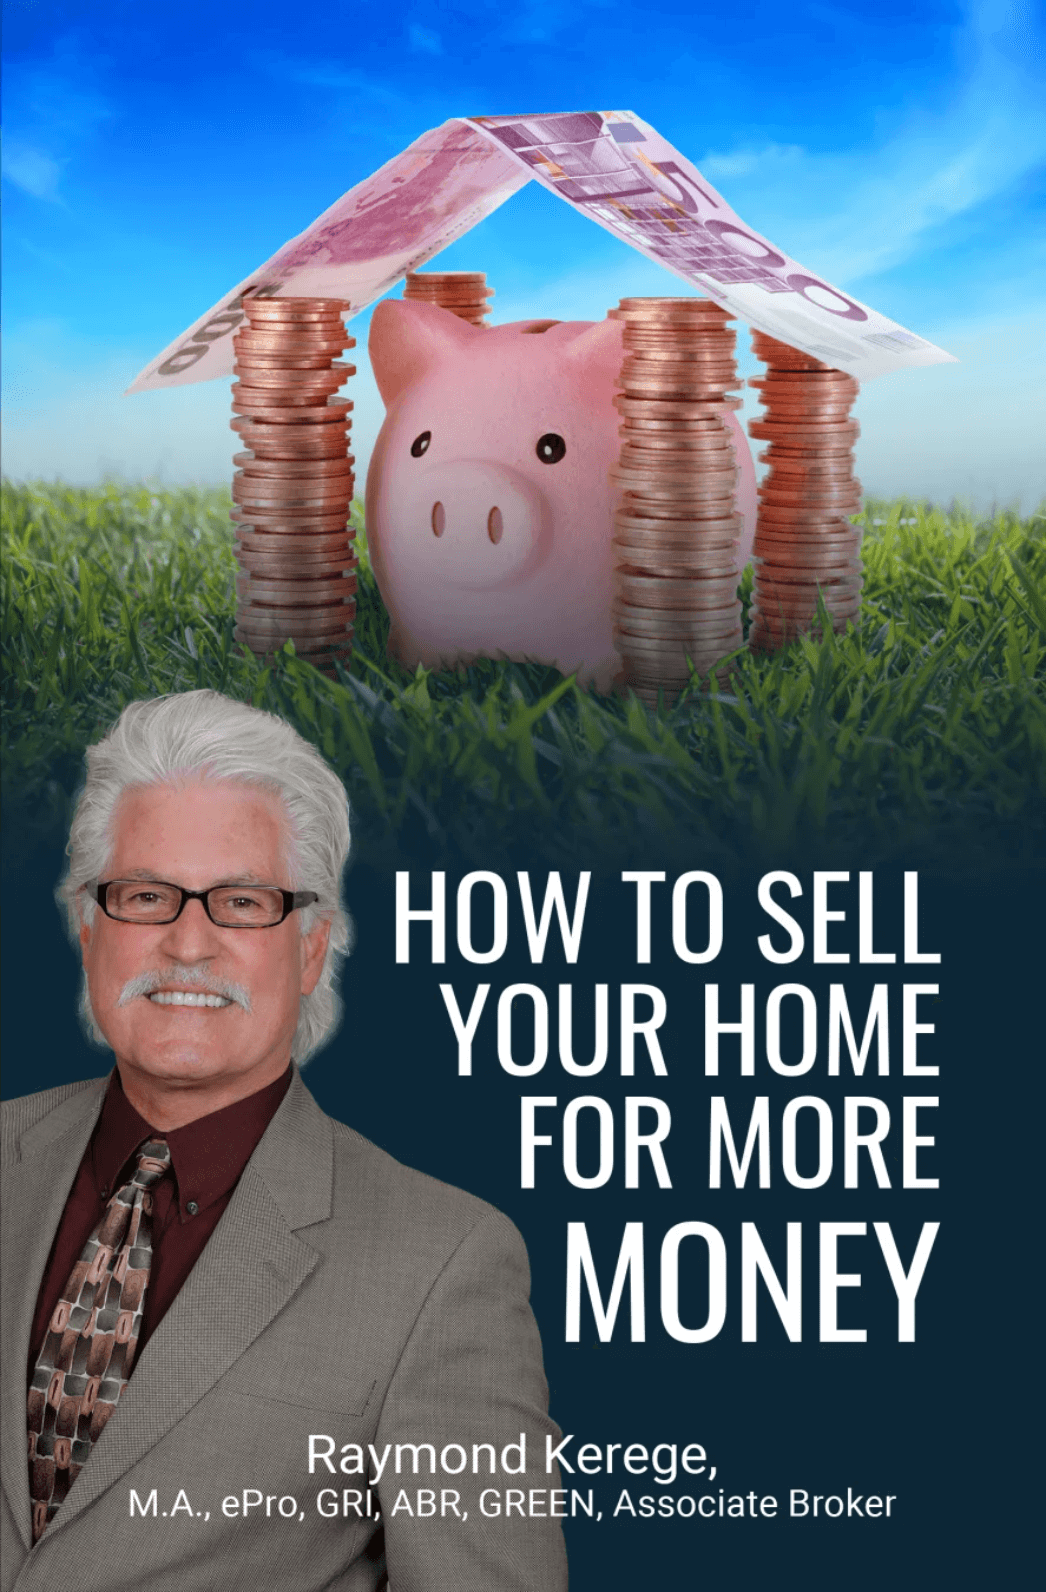 How To Sell Your Home For More Money